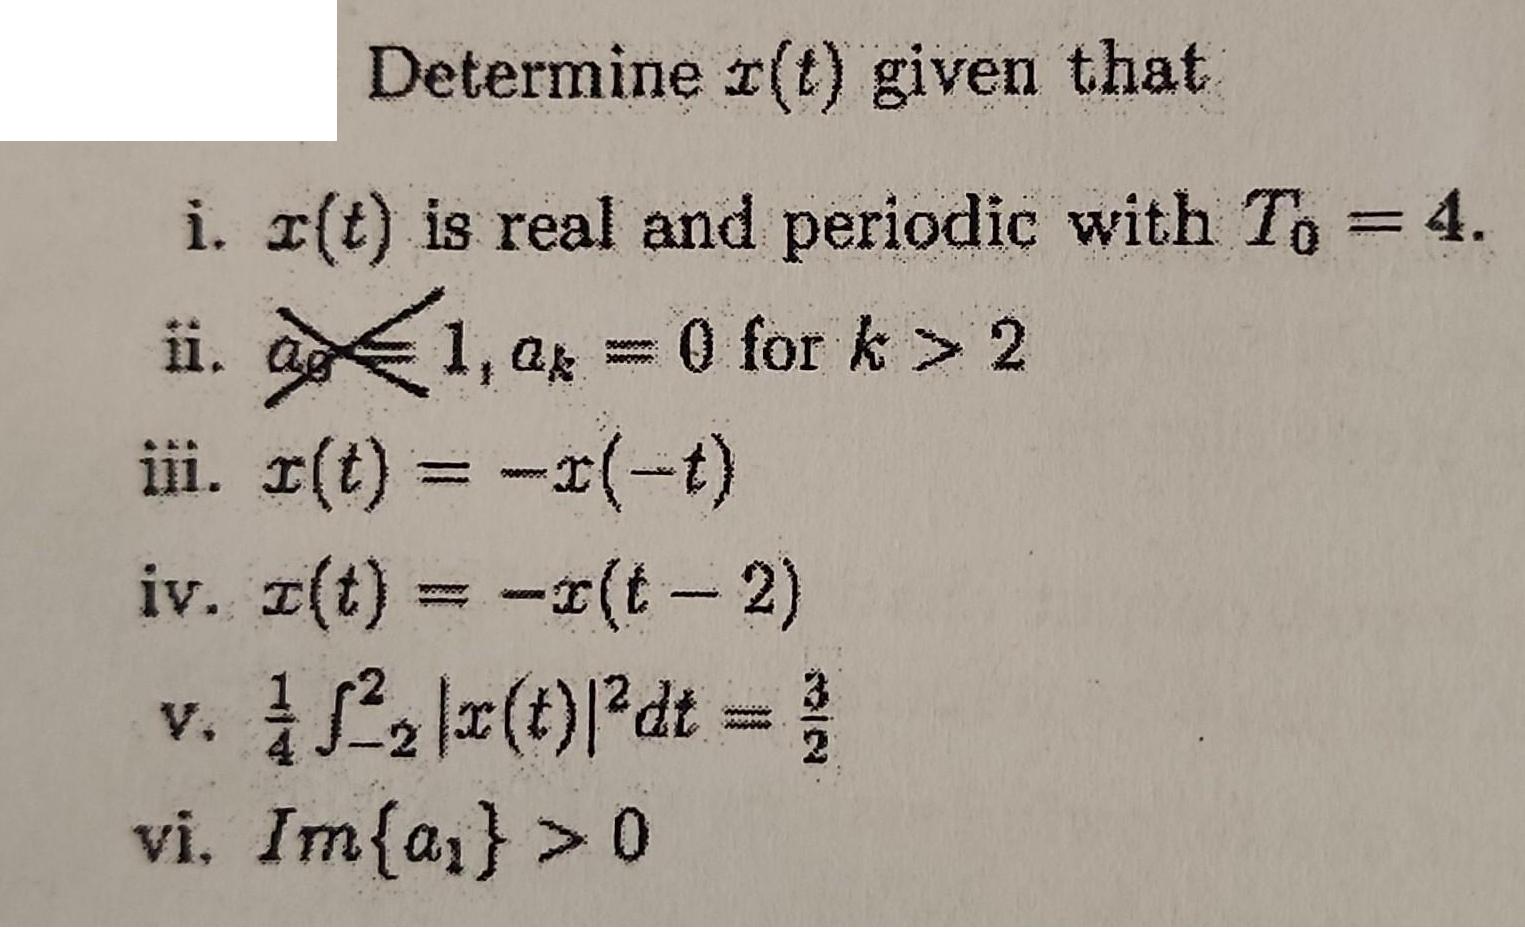 Determine r(t) given that i. r(t) is real and periodic with To = 4. ii. 1, ak = 0 for k > 2 iii. r(t) =